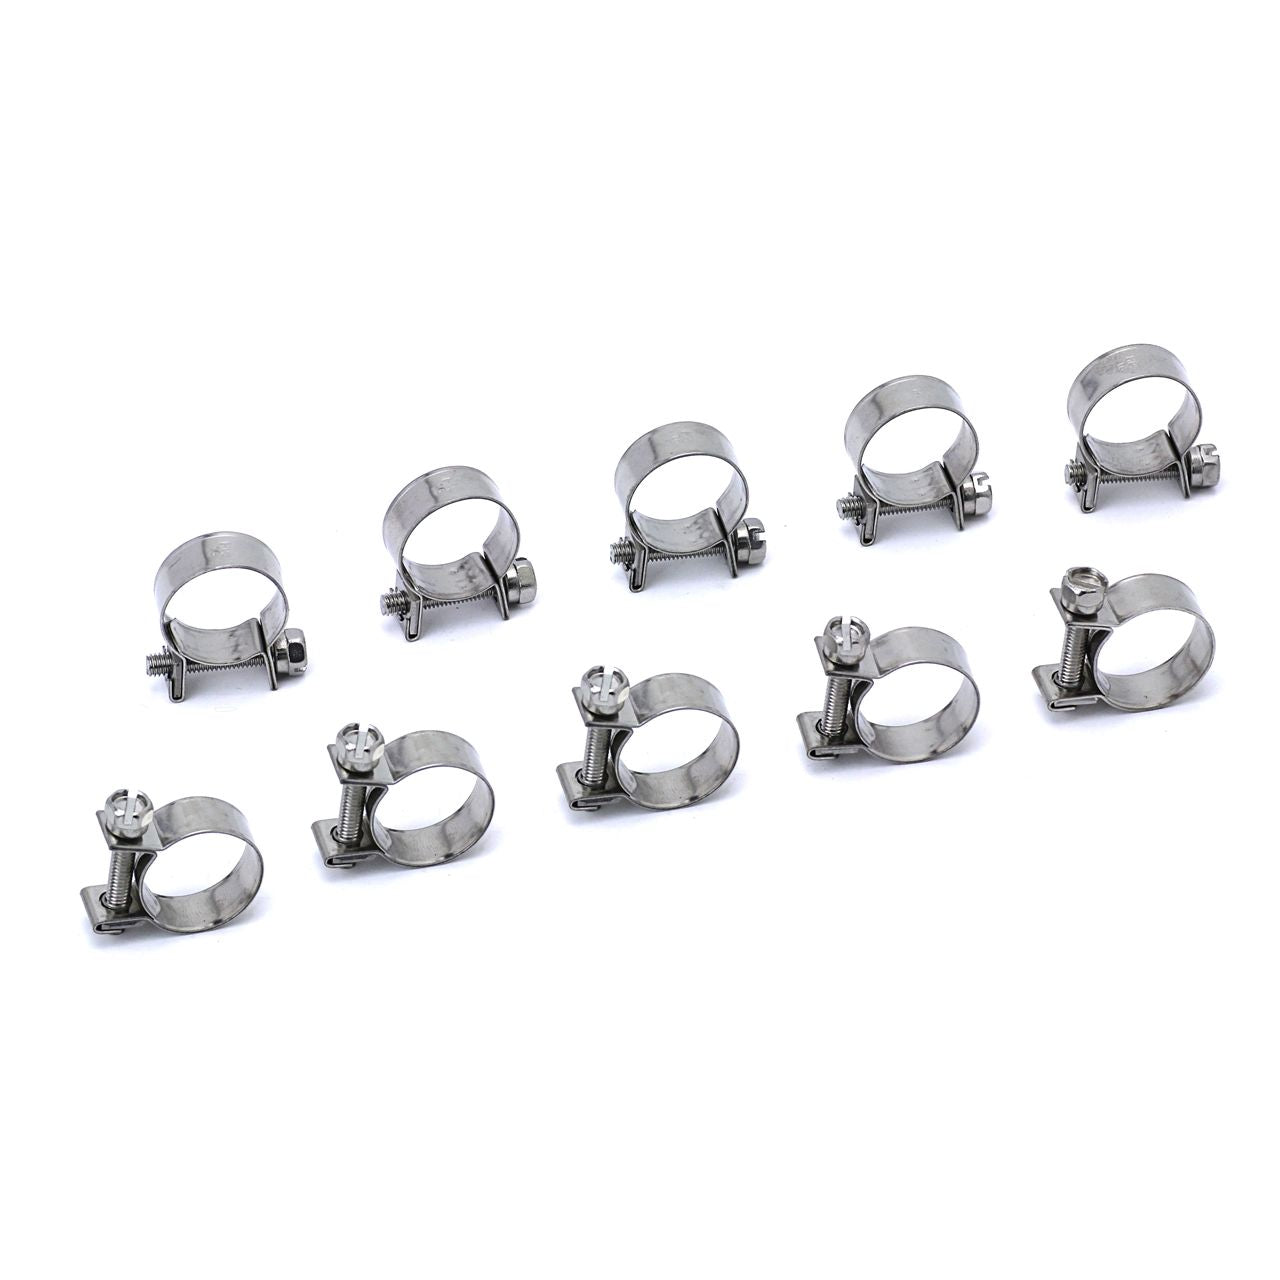 HPS #14 Stainless Steel Fuel Injection Hose Clamps 10pc Pack 15/32" - 35/64" (12mm - 14mm)